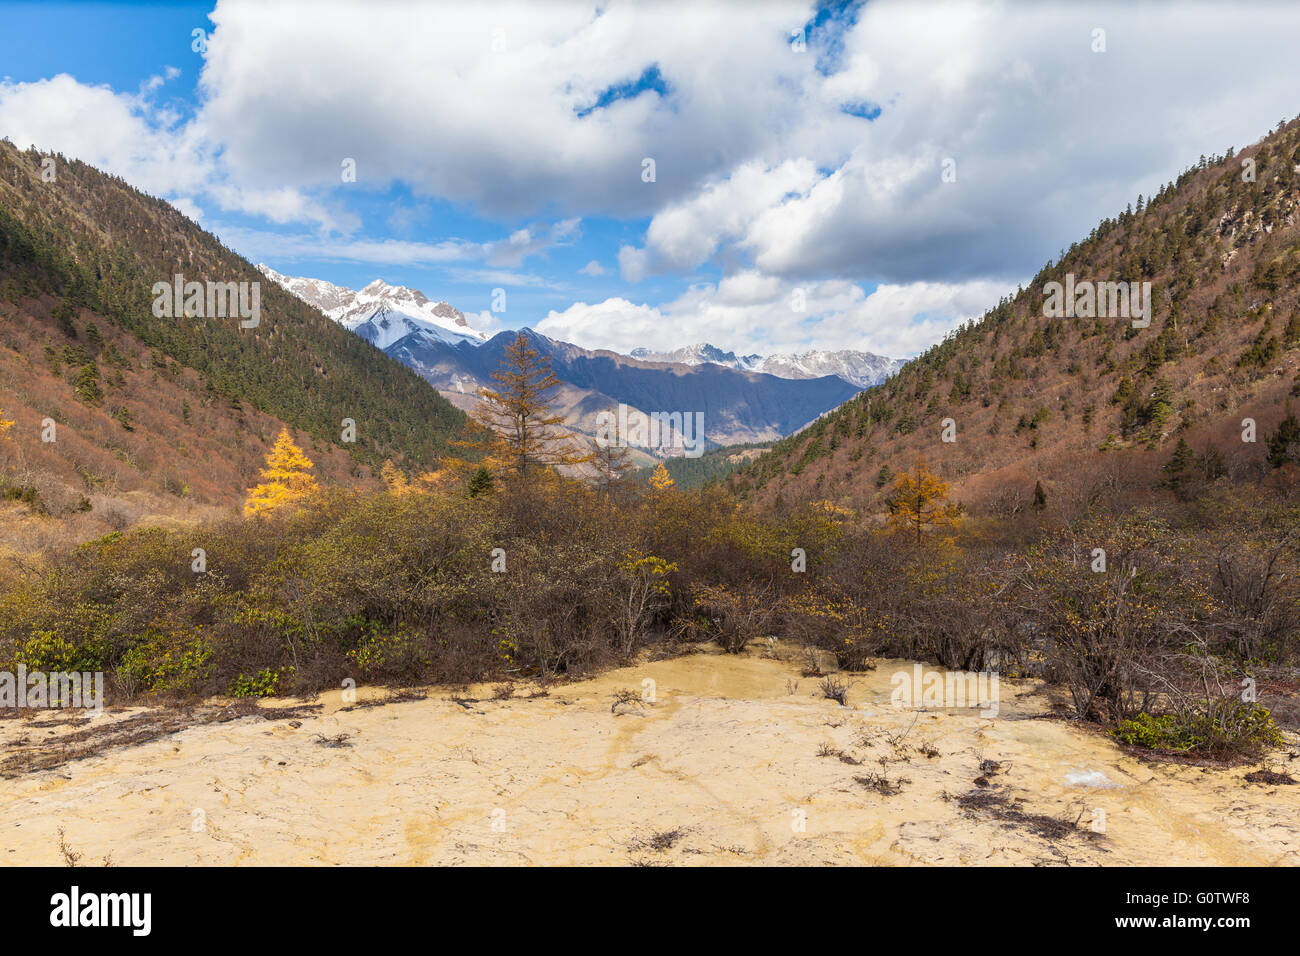 Beautiful view in Huanglong national park in Sichuan province, China Stock Photo